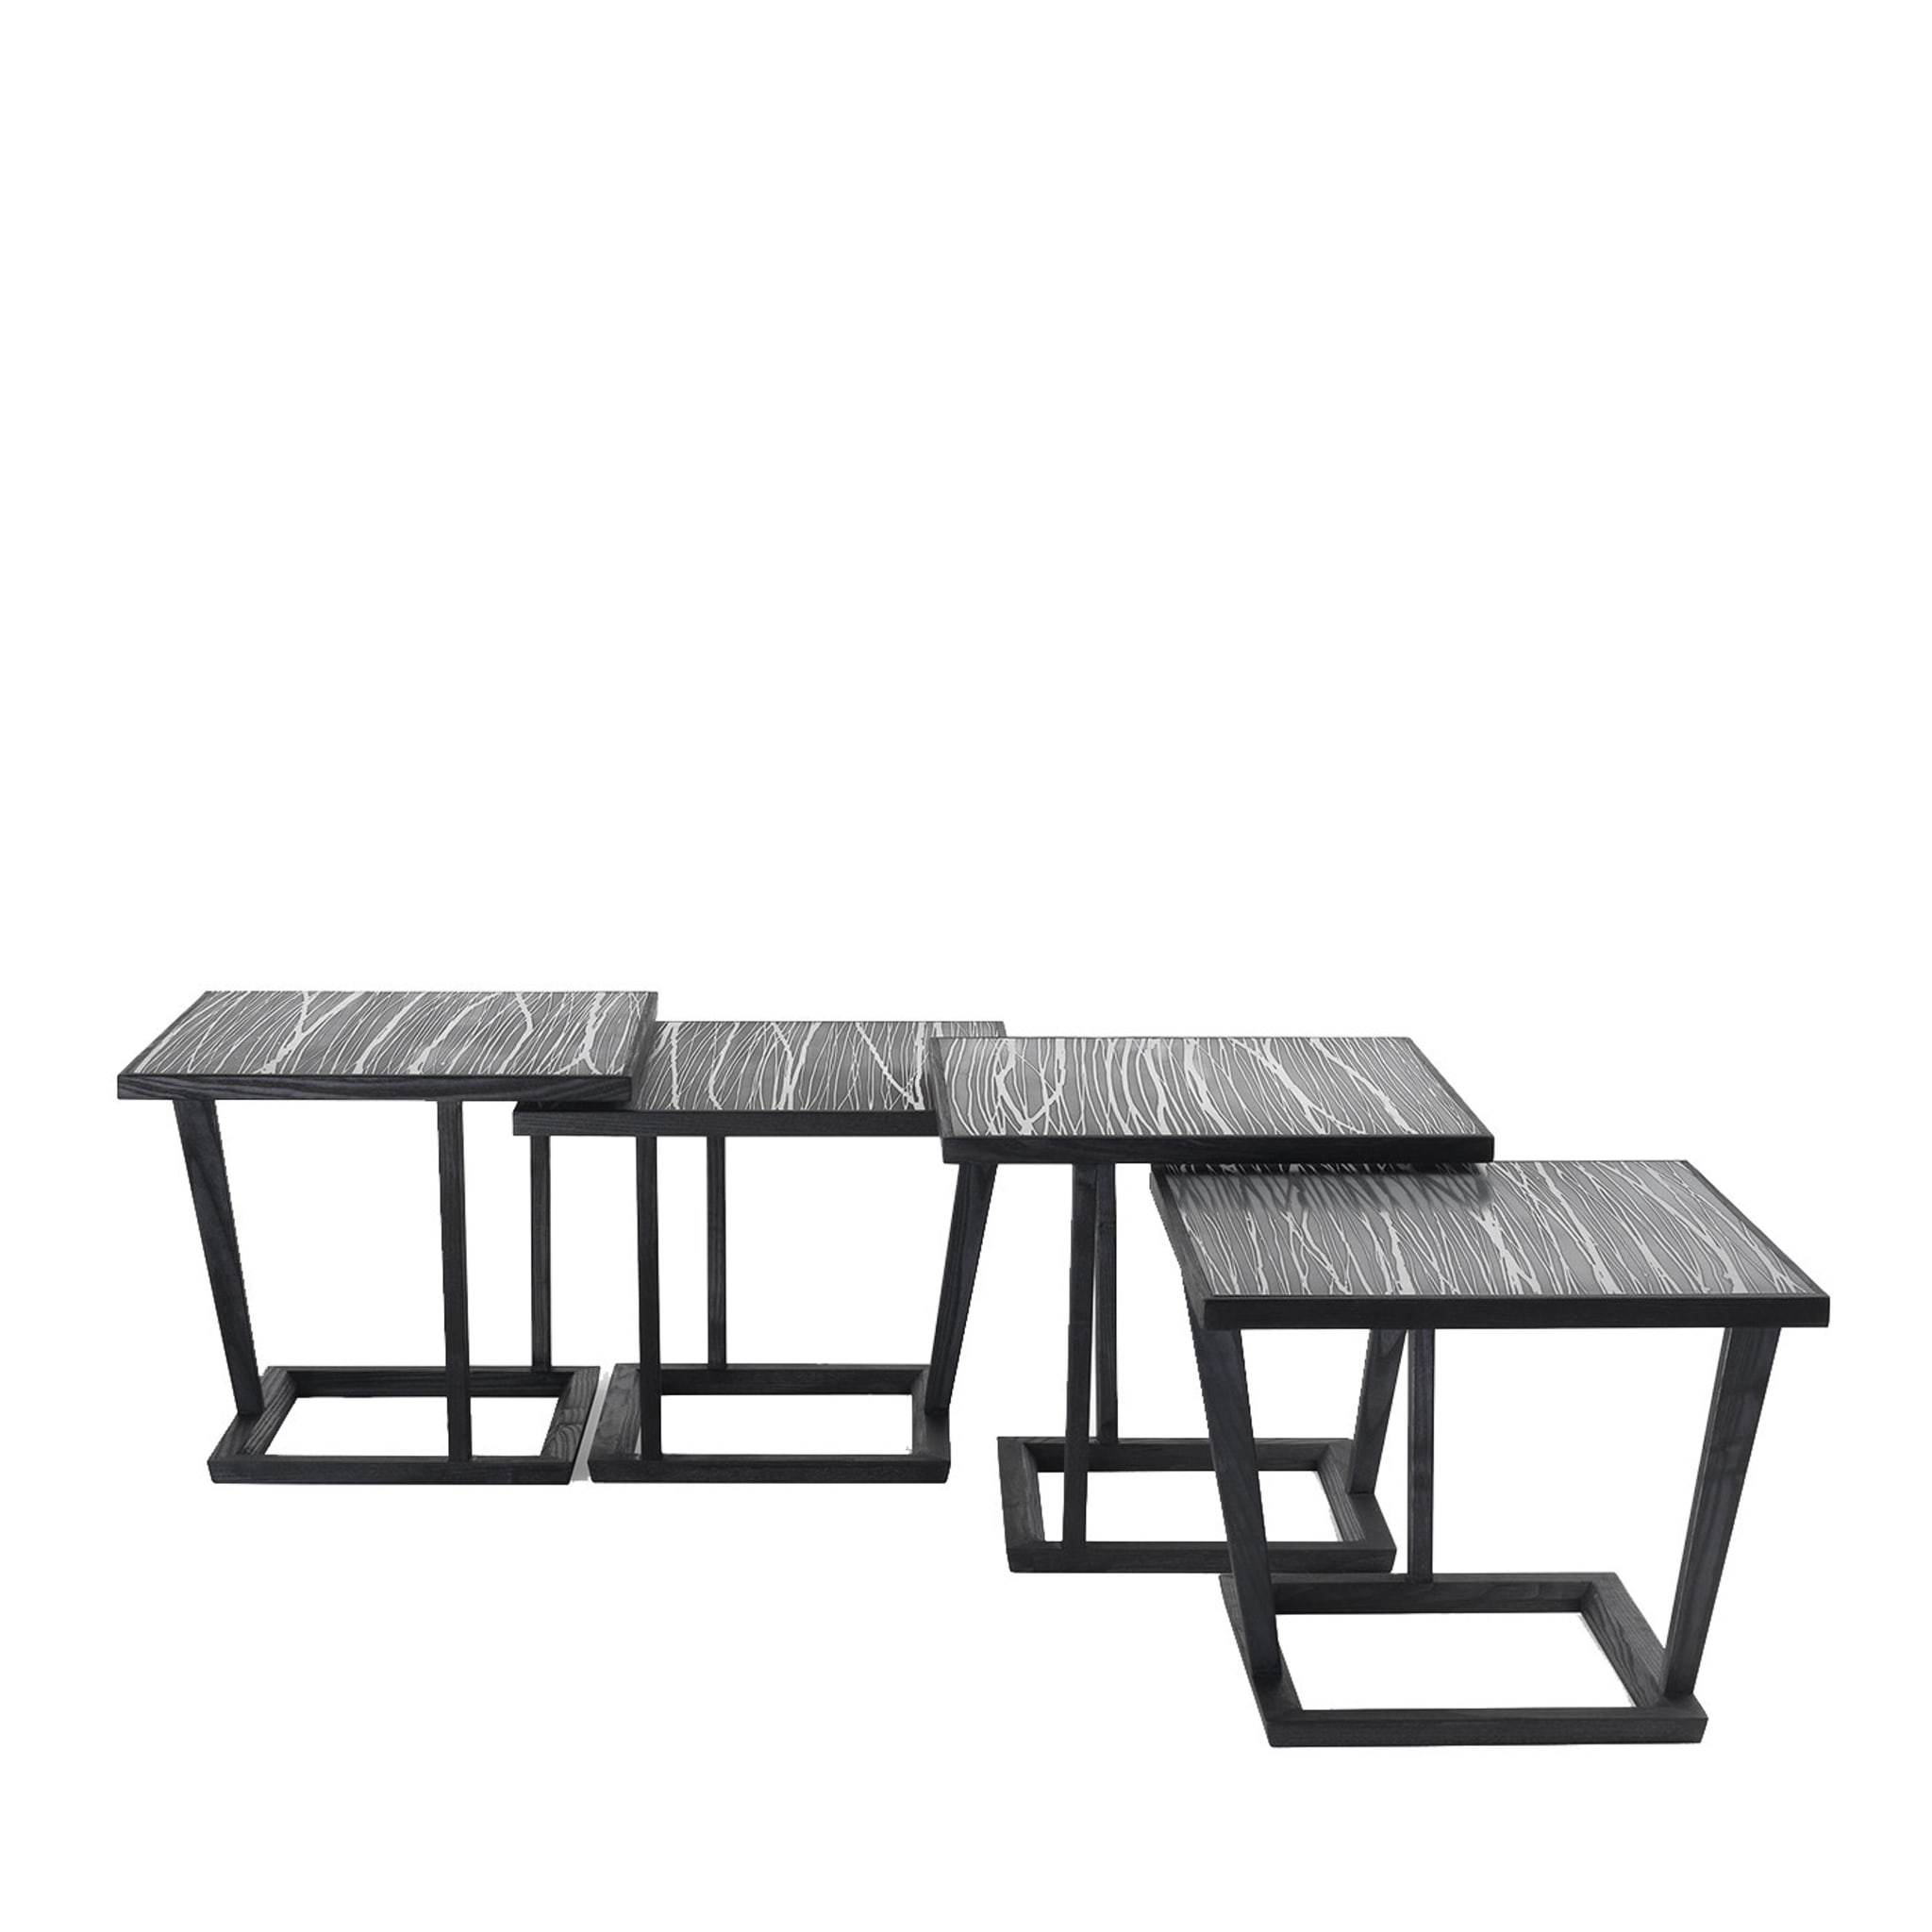 Set of 4 Tigre Nesting Tables - Main view